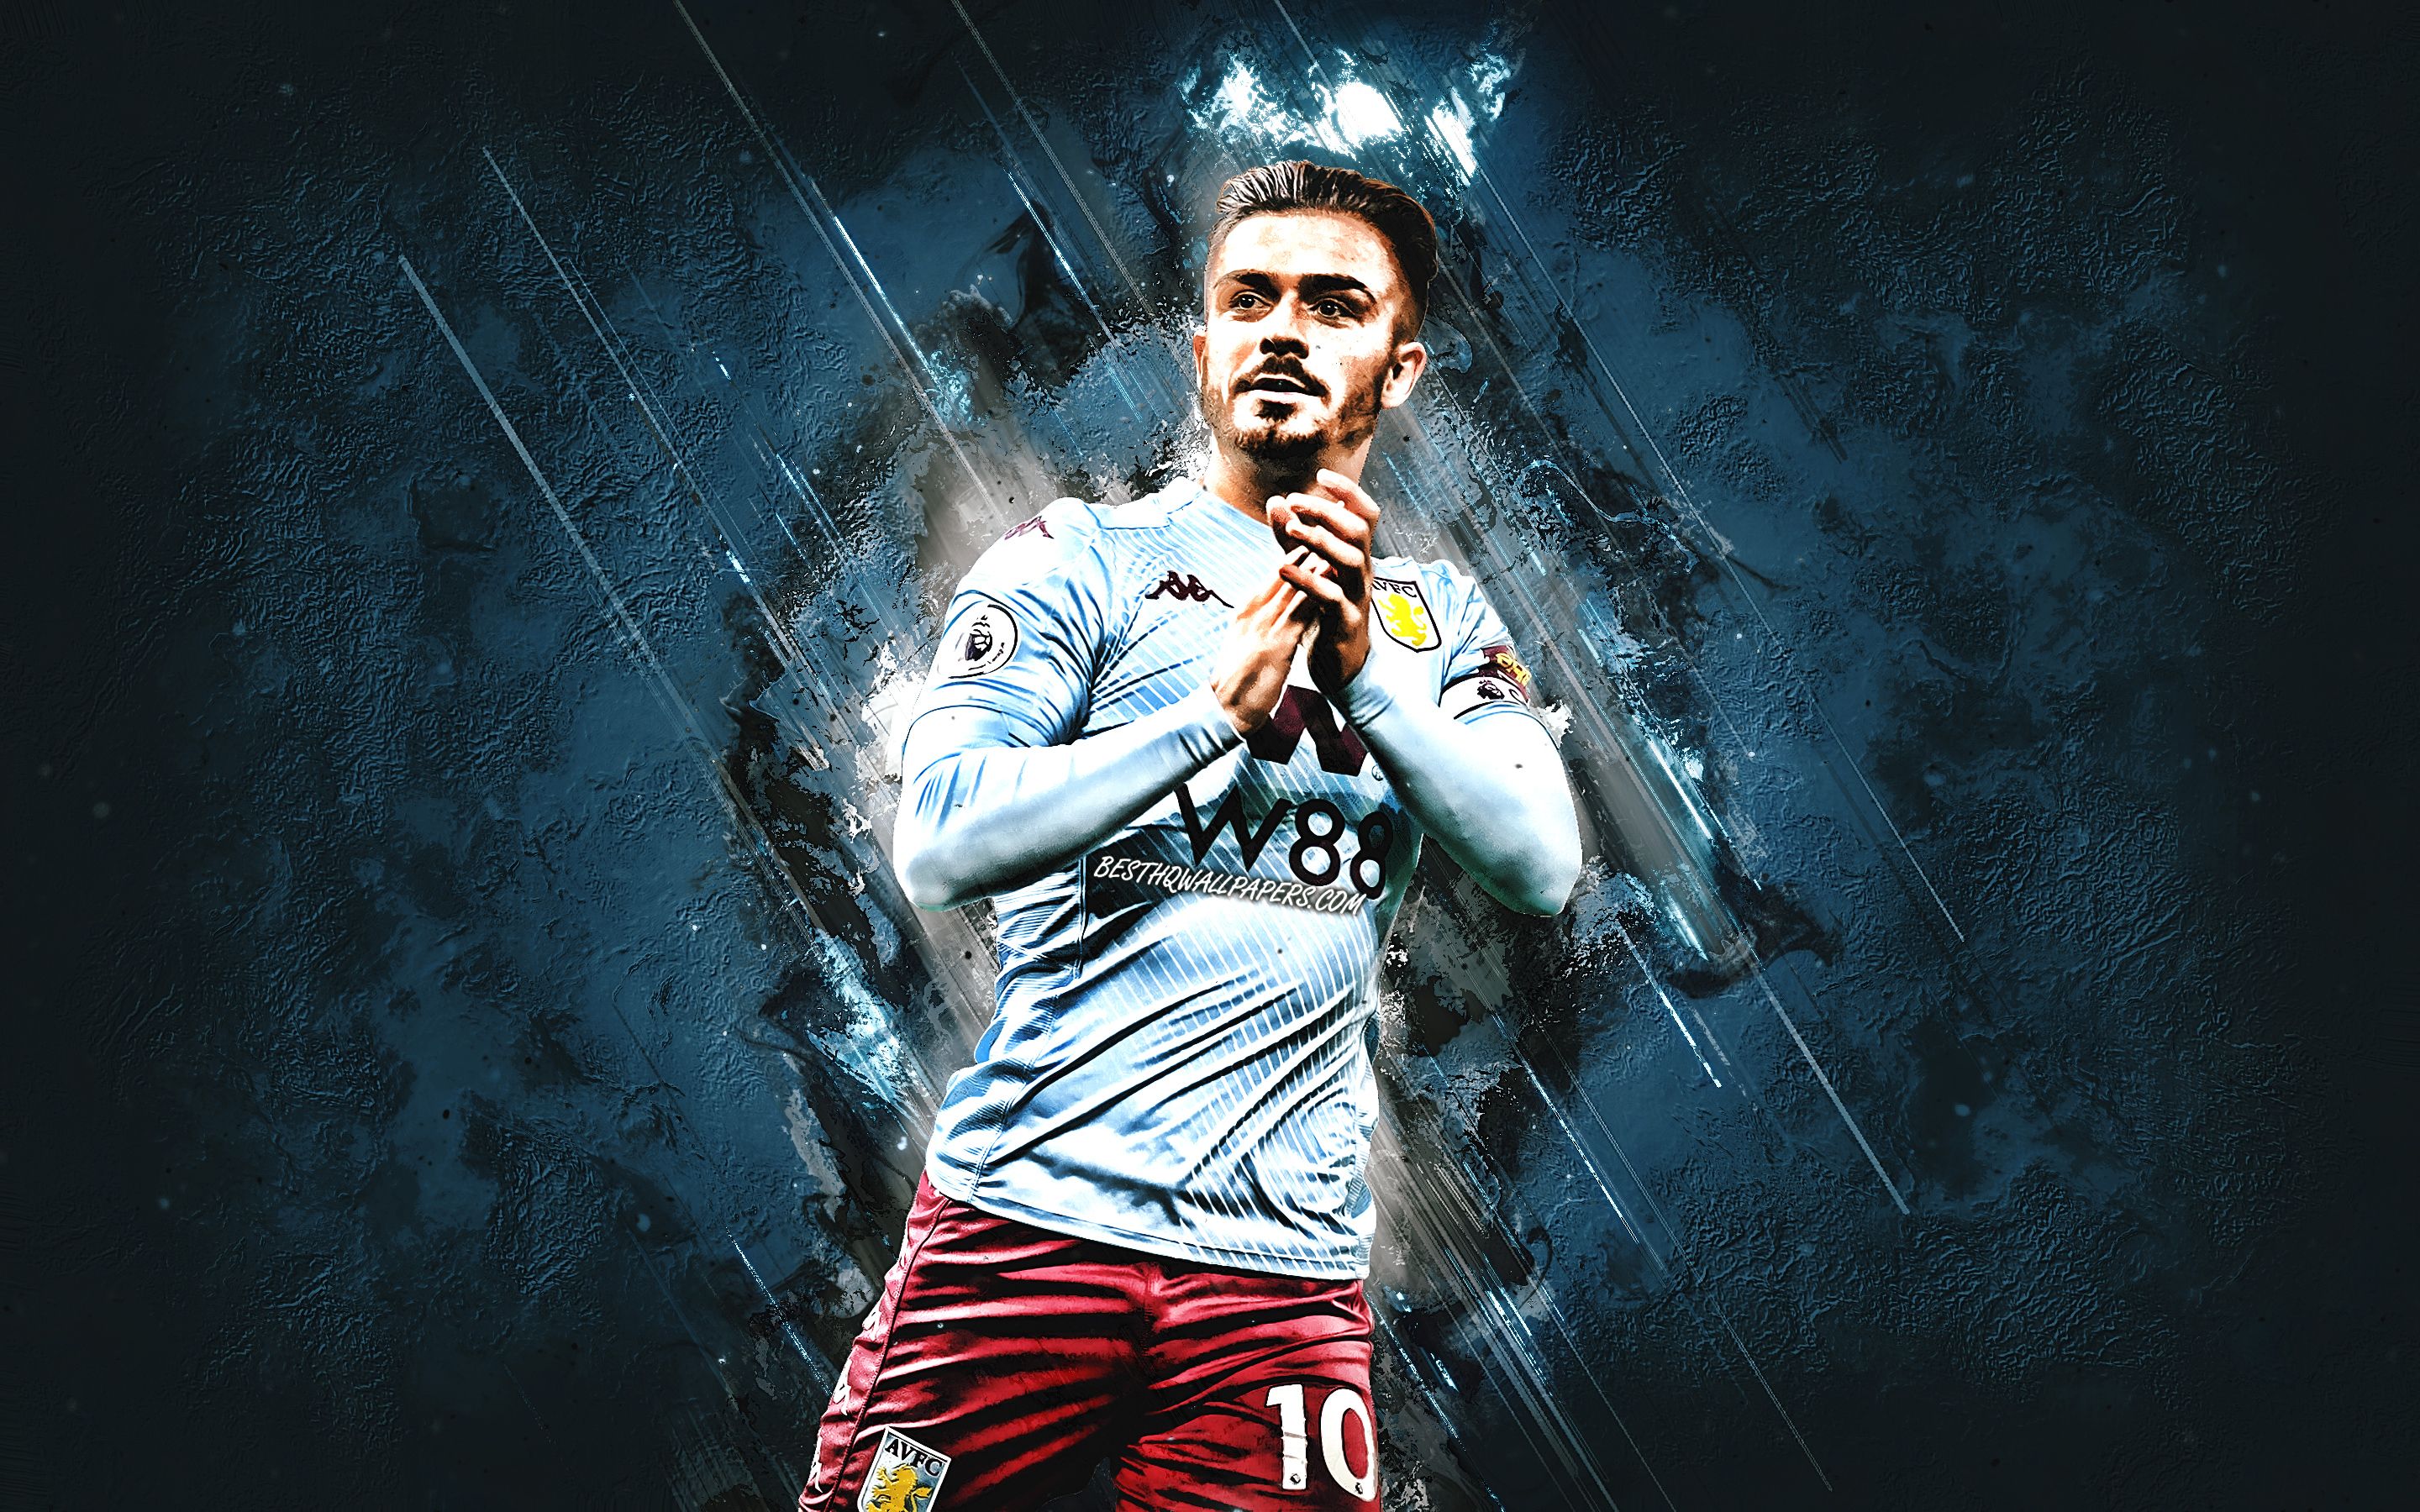 Download wallpaper Jack Grealish, Aston Villa FC, English football player, portrait, Premier League, England, football, Irish footballer, blue stone background for desktop with resolution 2880x1800. High Quality HD picture wallpaper